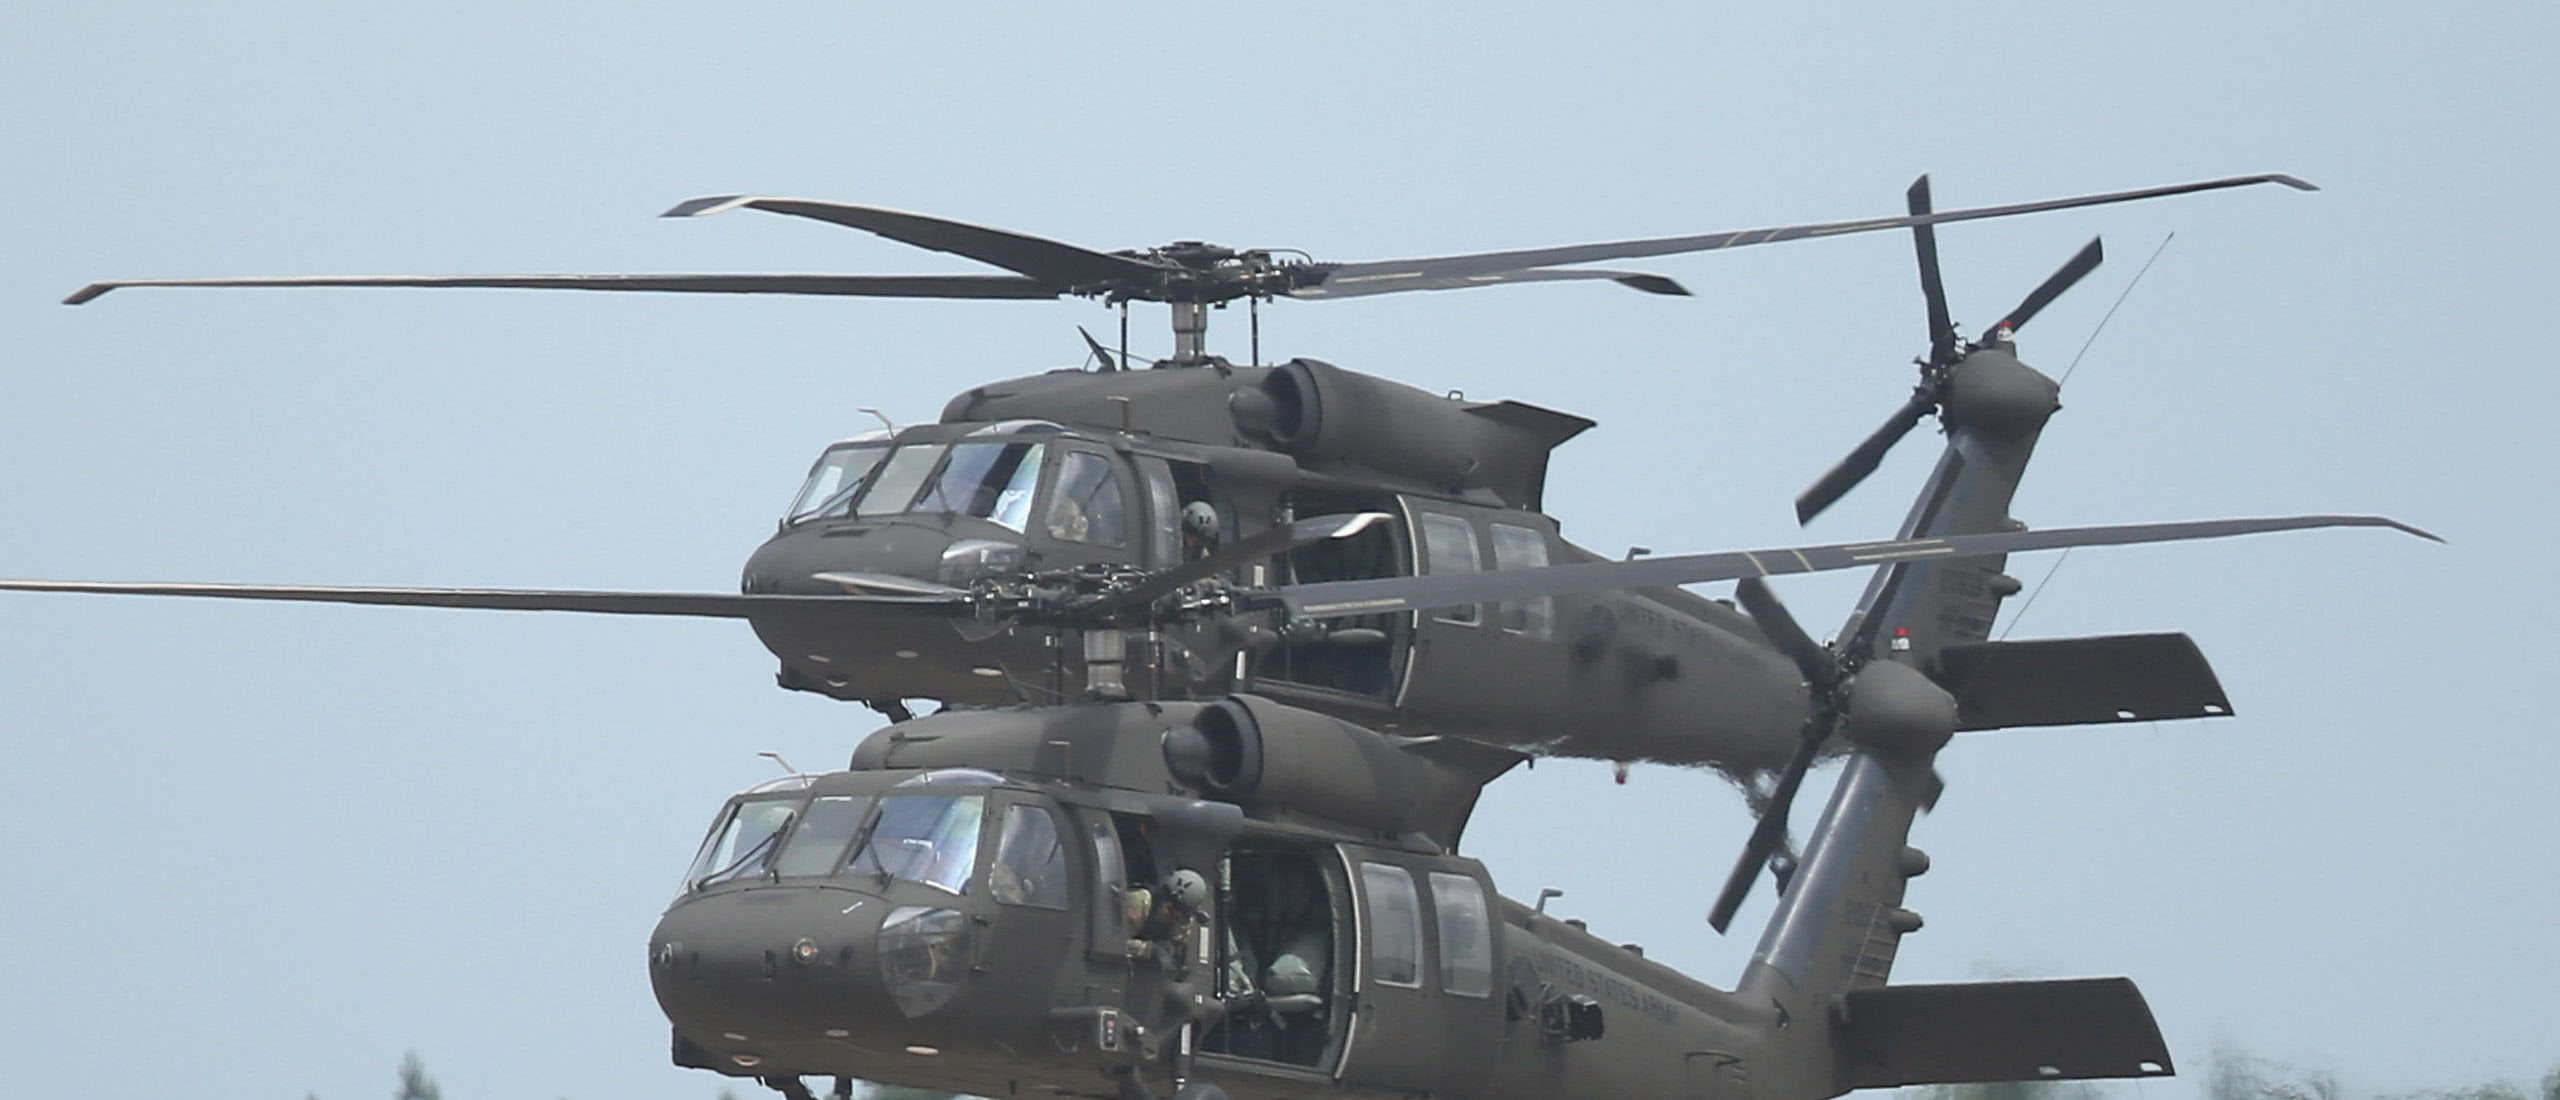 Two Black Hawk Helicopters Crashed During Training Accident, Utah National Guard Confirms